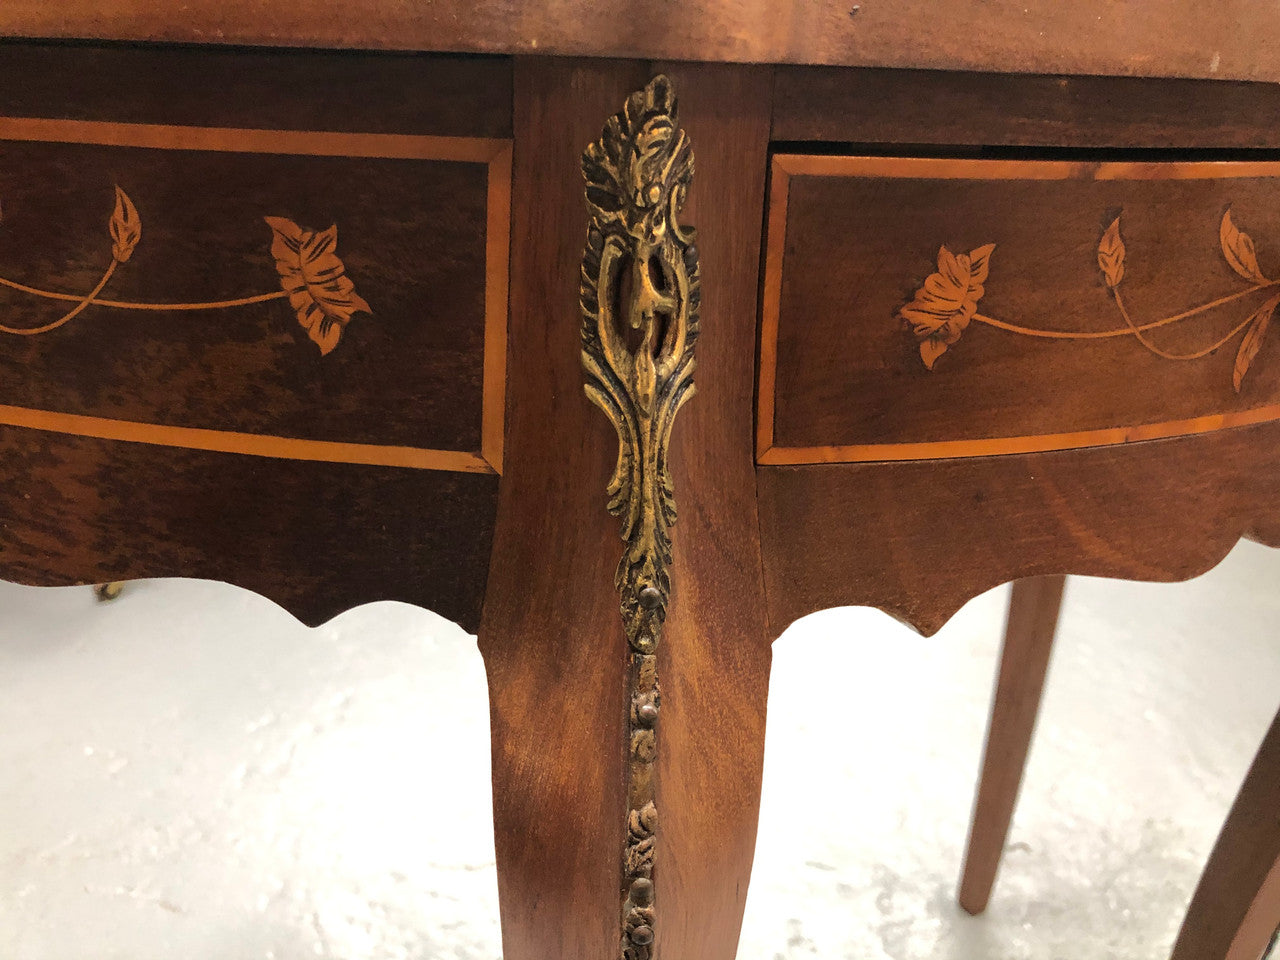 Stunning small inlaid French Walnut Louis XV style hall table with ormolu mounts and beautiful details. It has been sourced from France and is in good orignal detailed condition.